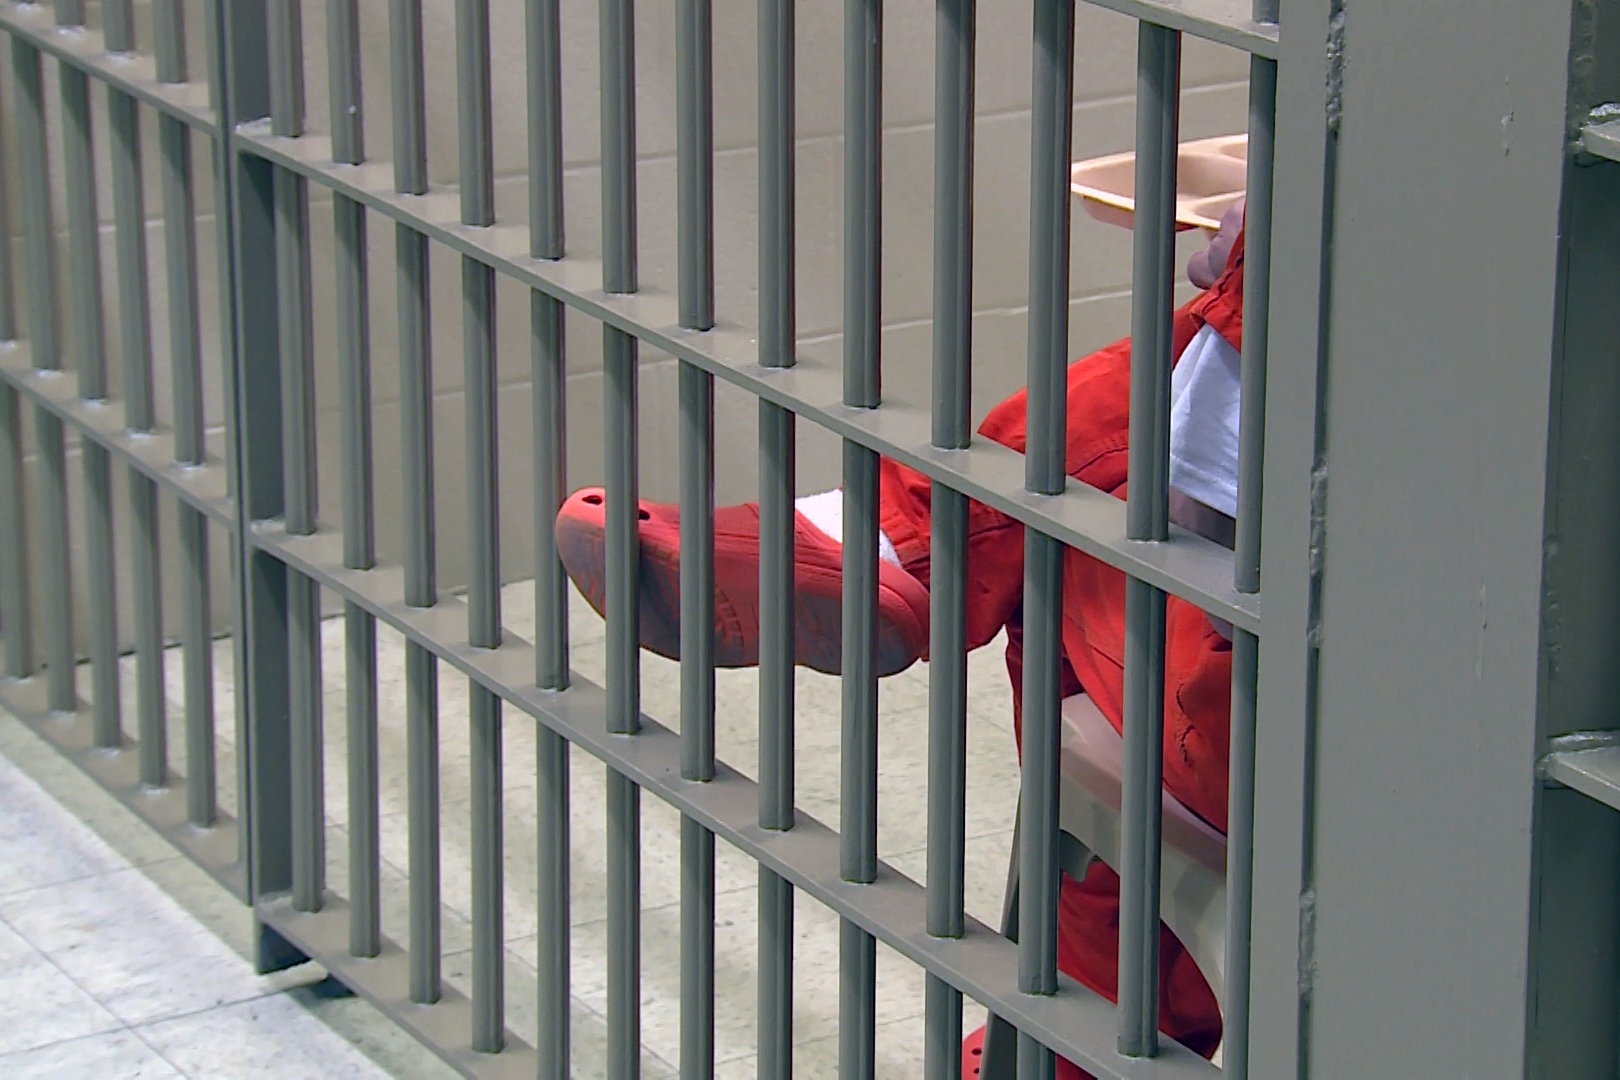 A person in an orange prison outfit sits in cell eating lunch